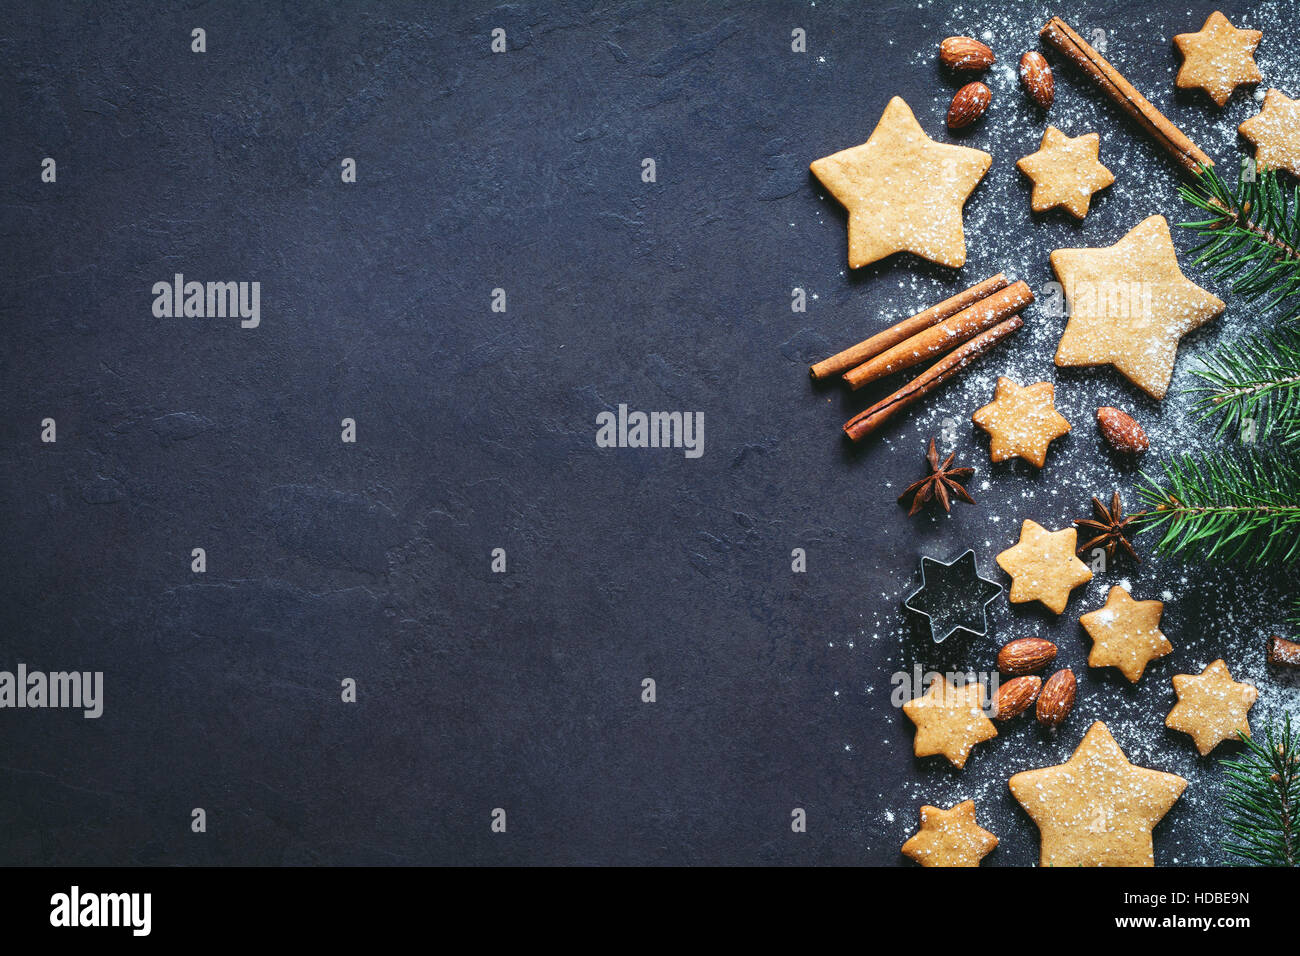 Christmas or New Year background with gingerbread cookies, spices, nuts, flour and fir tree. Copy space for text Stock Photo